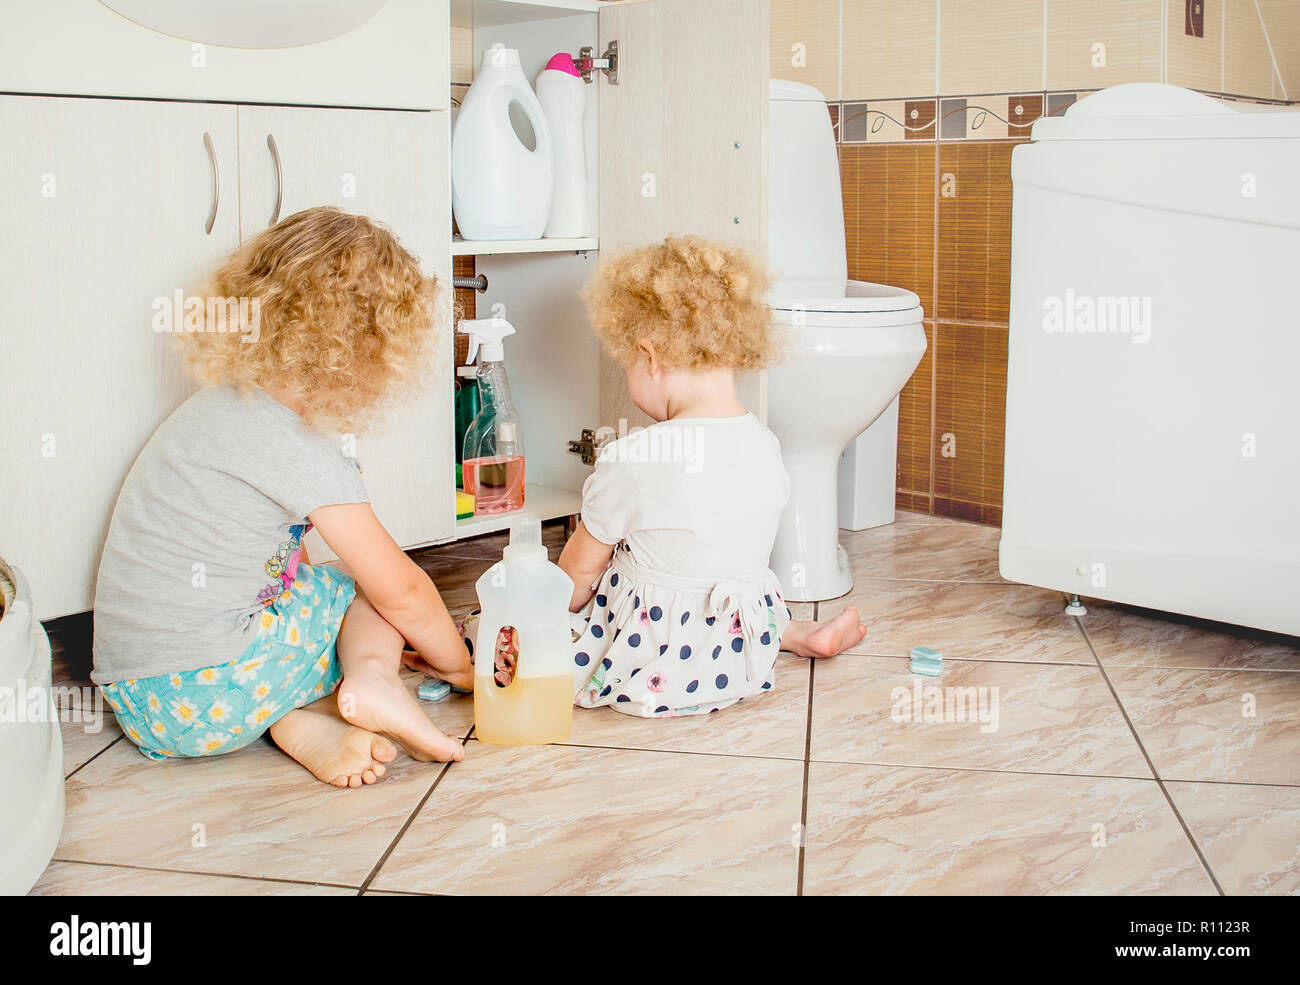 Unattended children play quietly at bathroom with dangerous household chemicals. Safety hazard at home concept. Keep away from children`s reach. Stock Photo